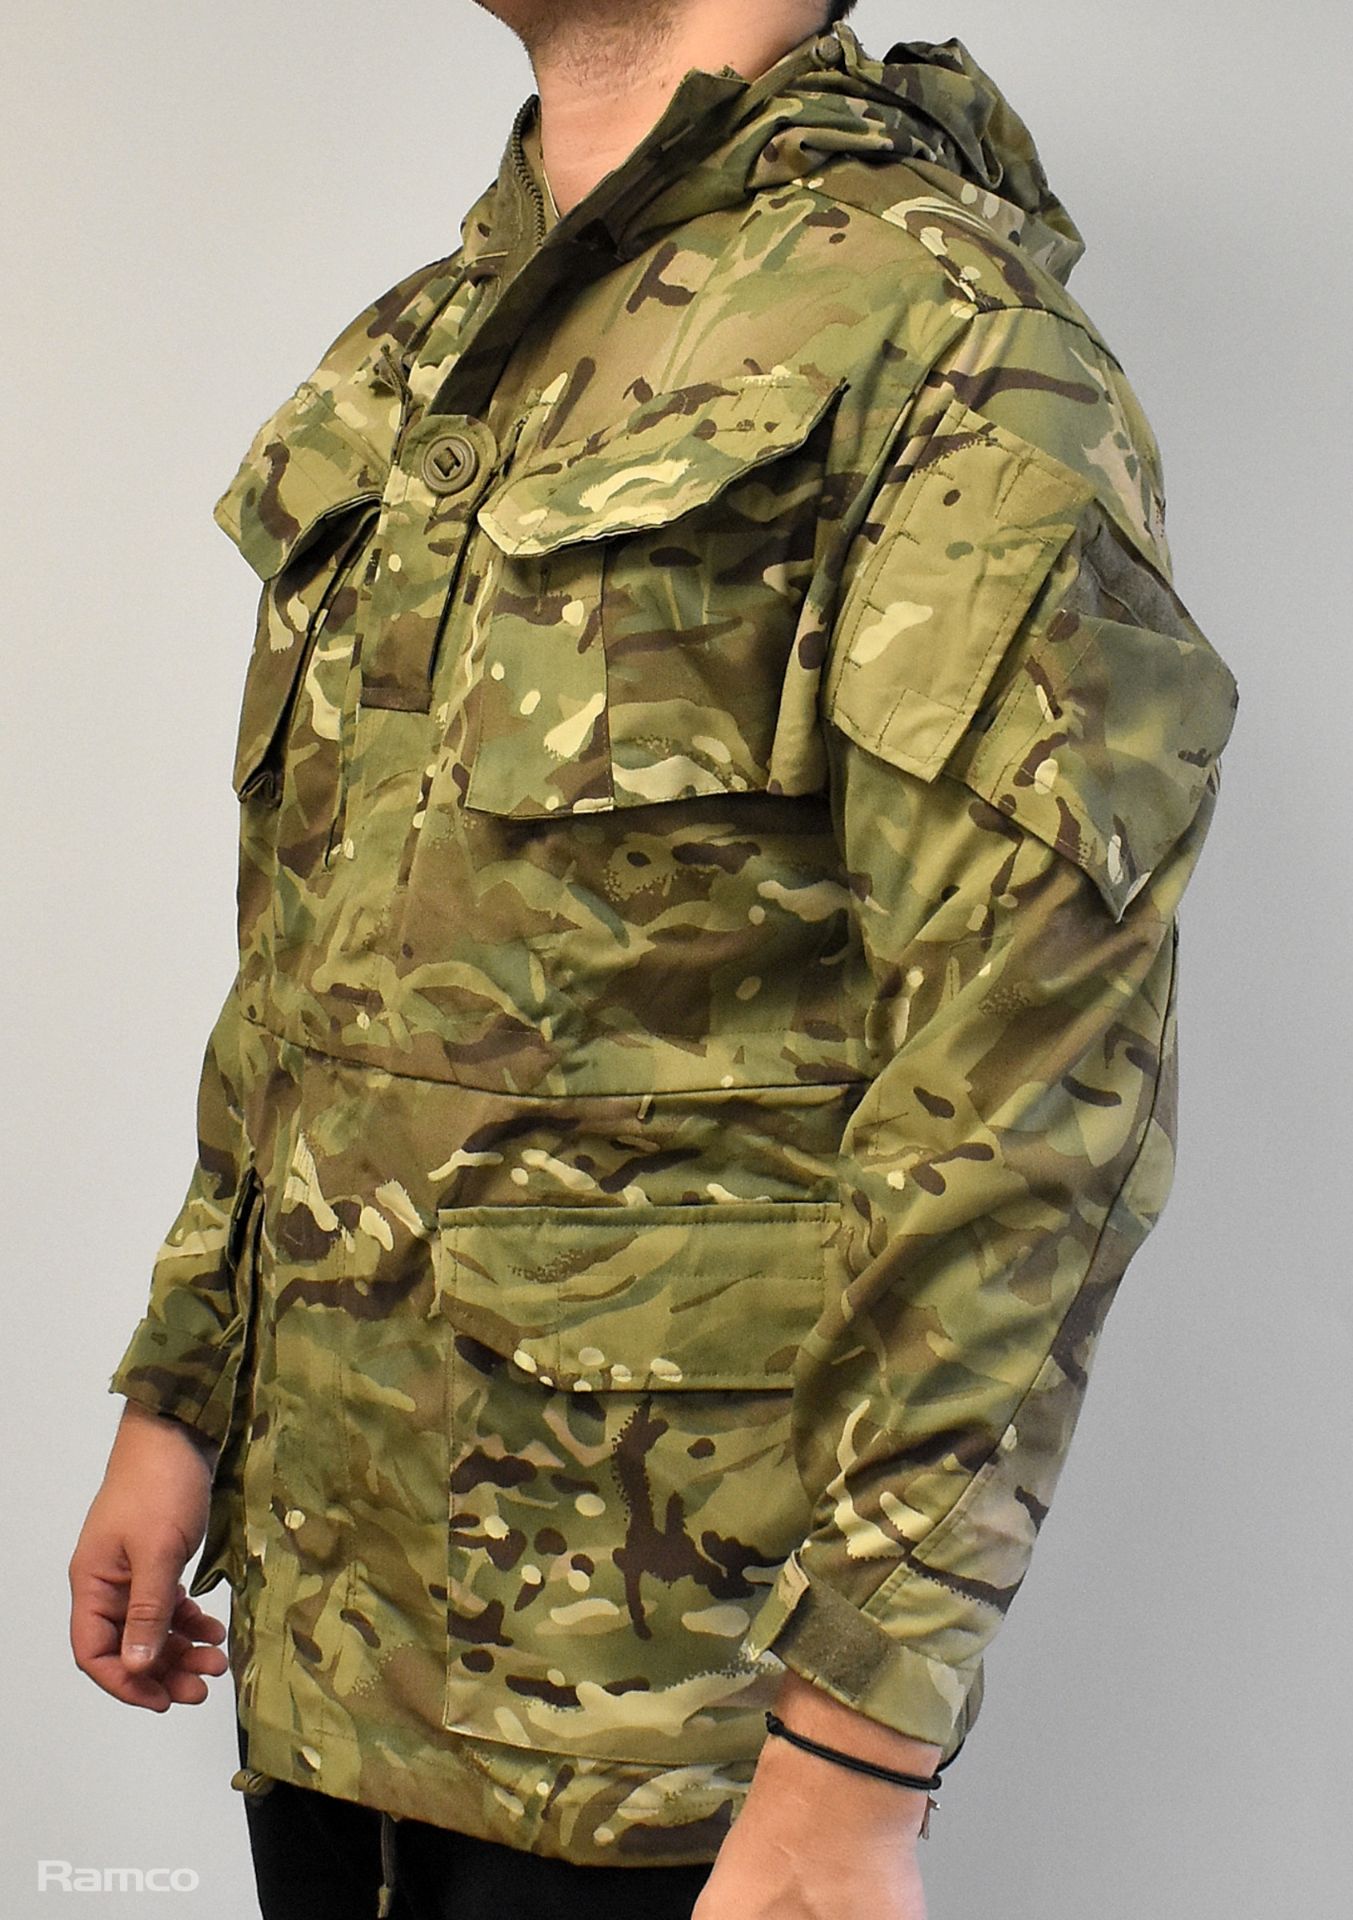 40x British Army MTP combat smocks 2 windproof - mixed grades and sizes - Image 2 of 12